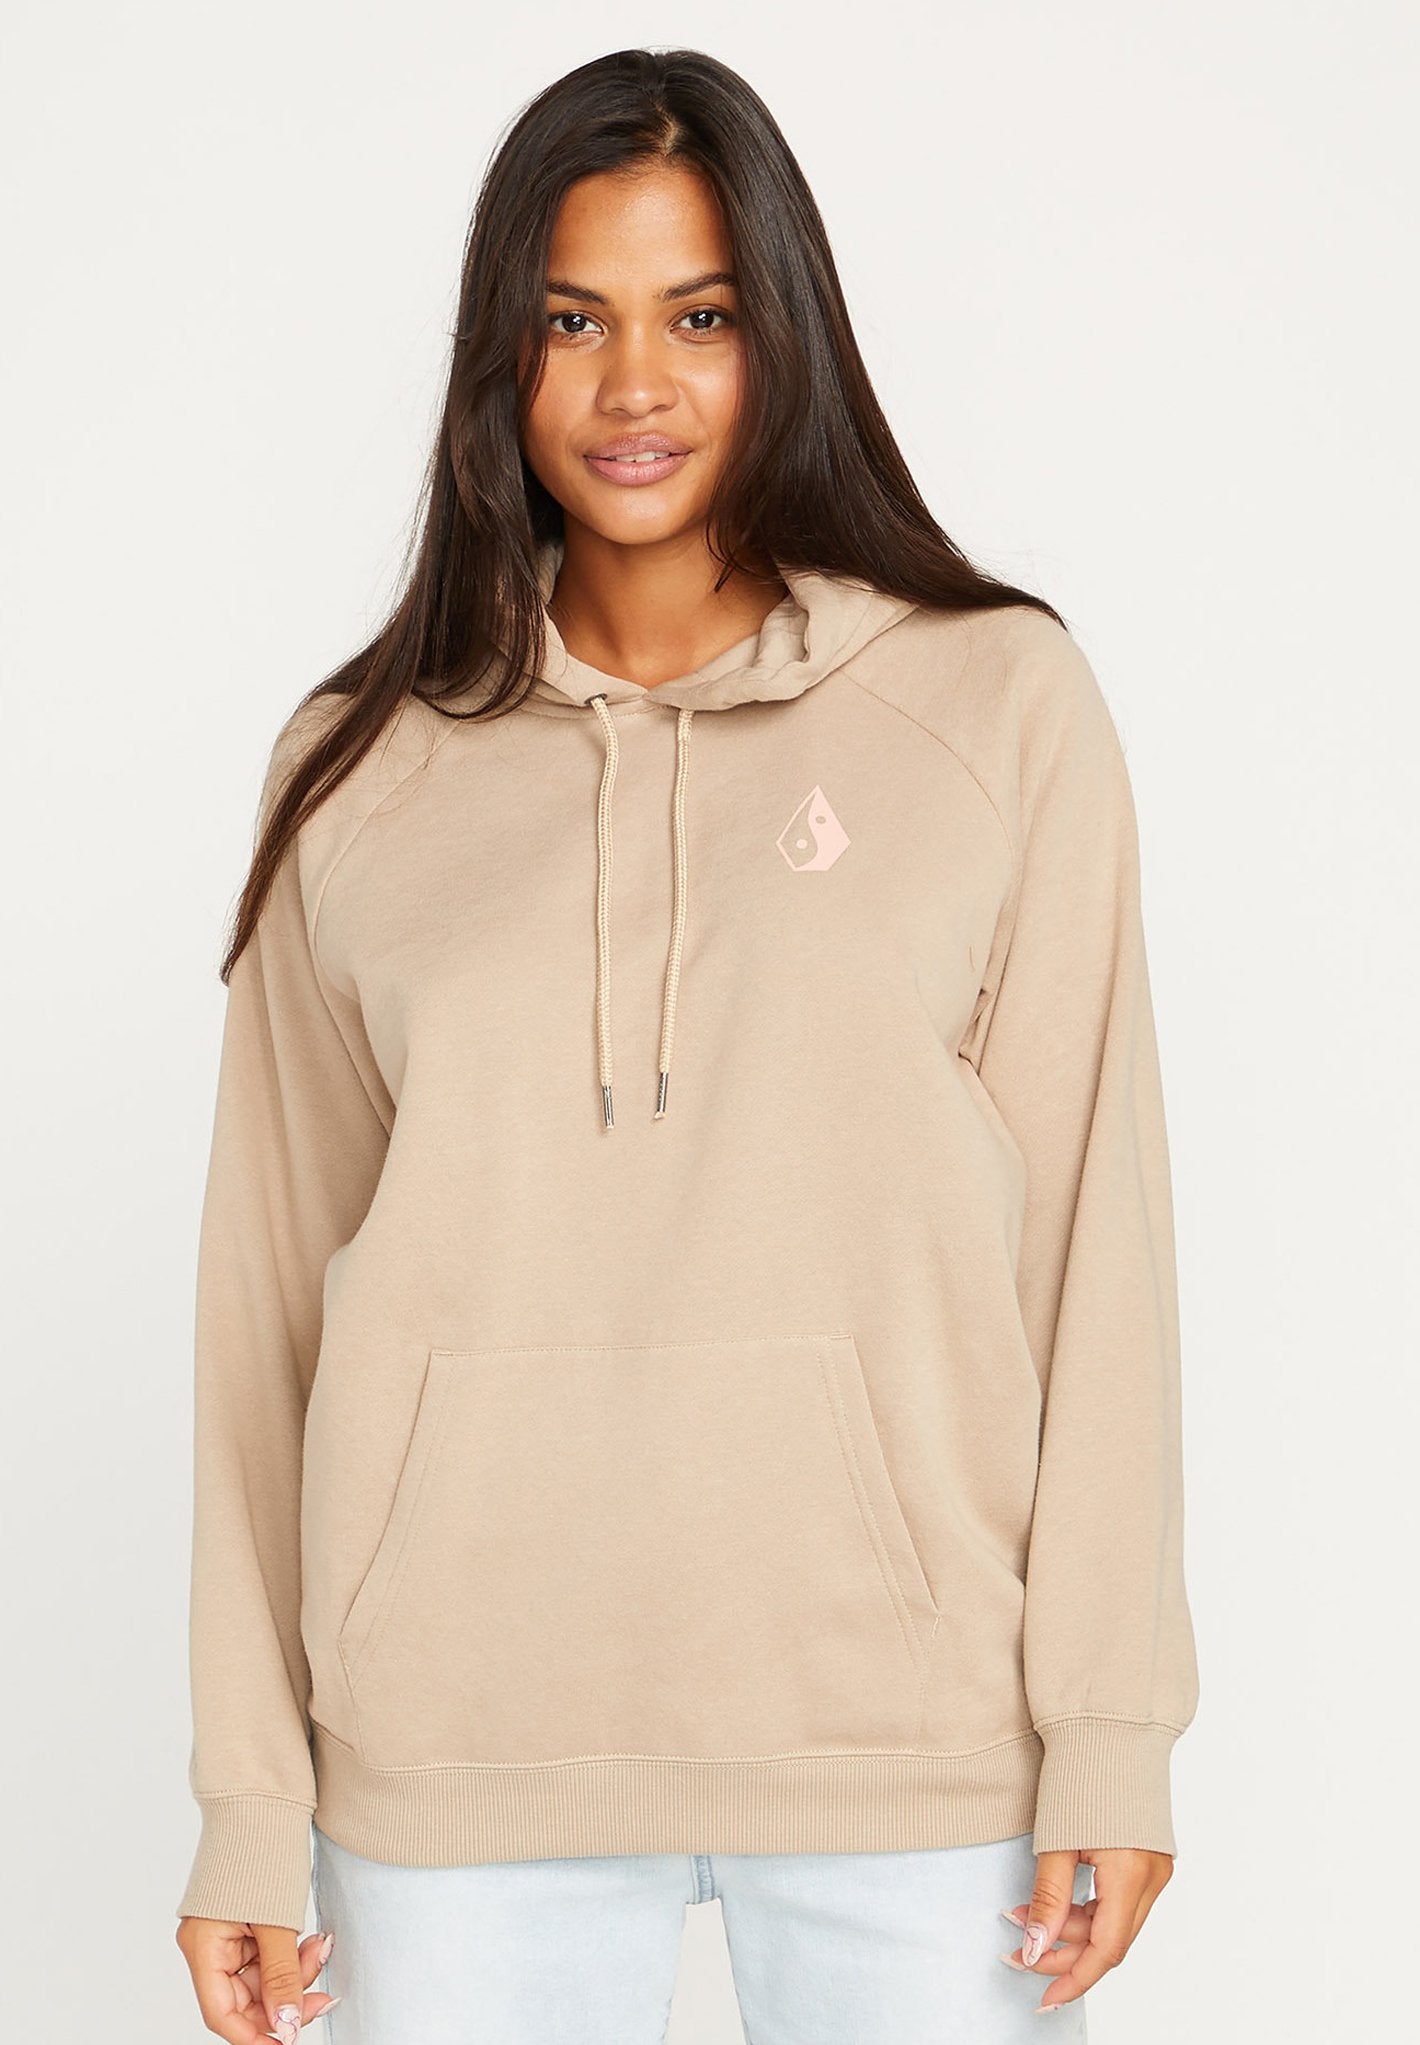 Sudadera con capucha Volcom Truly Stoked - Taupe | surfdevils.com